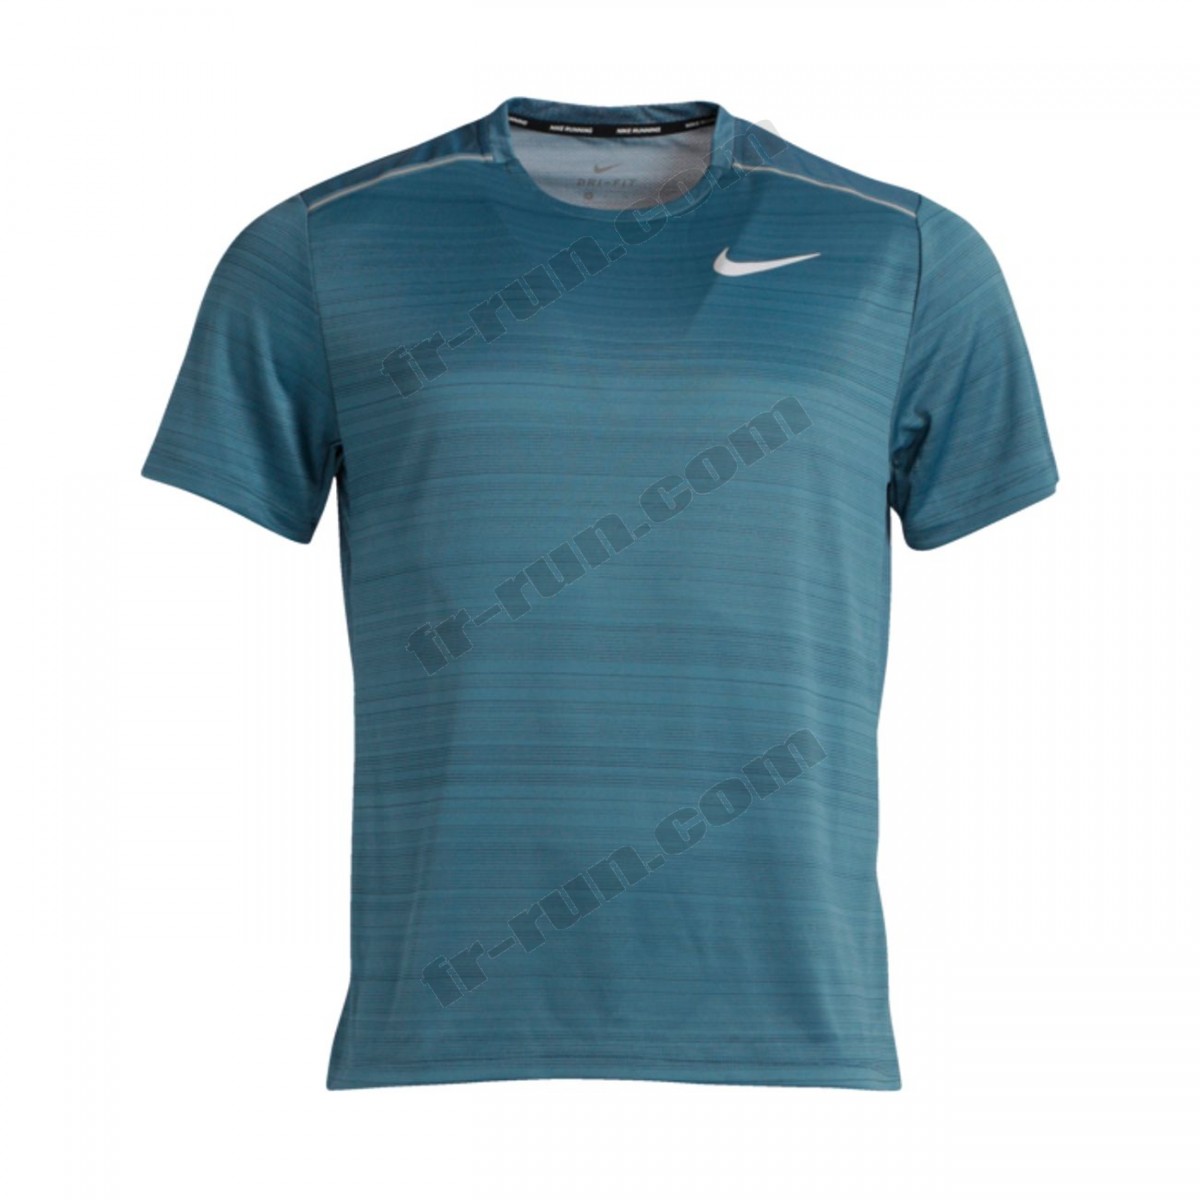 Nike/TEE SHIRT running homme NIKE NK DRY MILER TOP SS, GRIS √ Nouveau style √ Soldes - -0